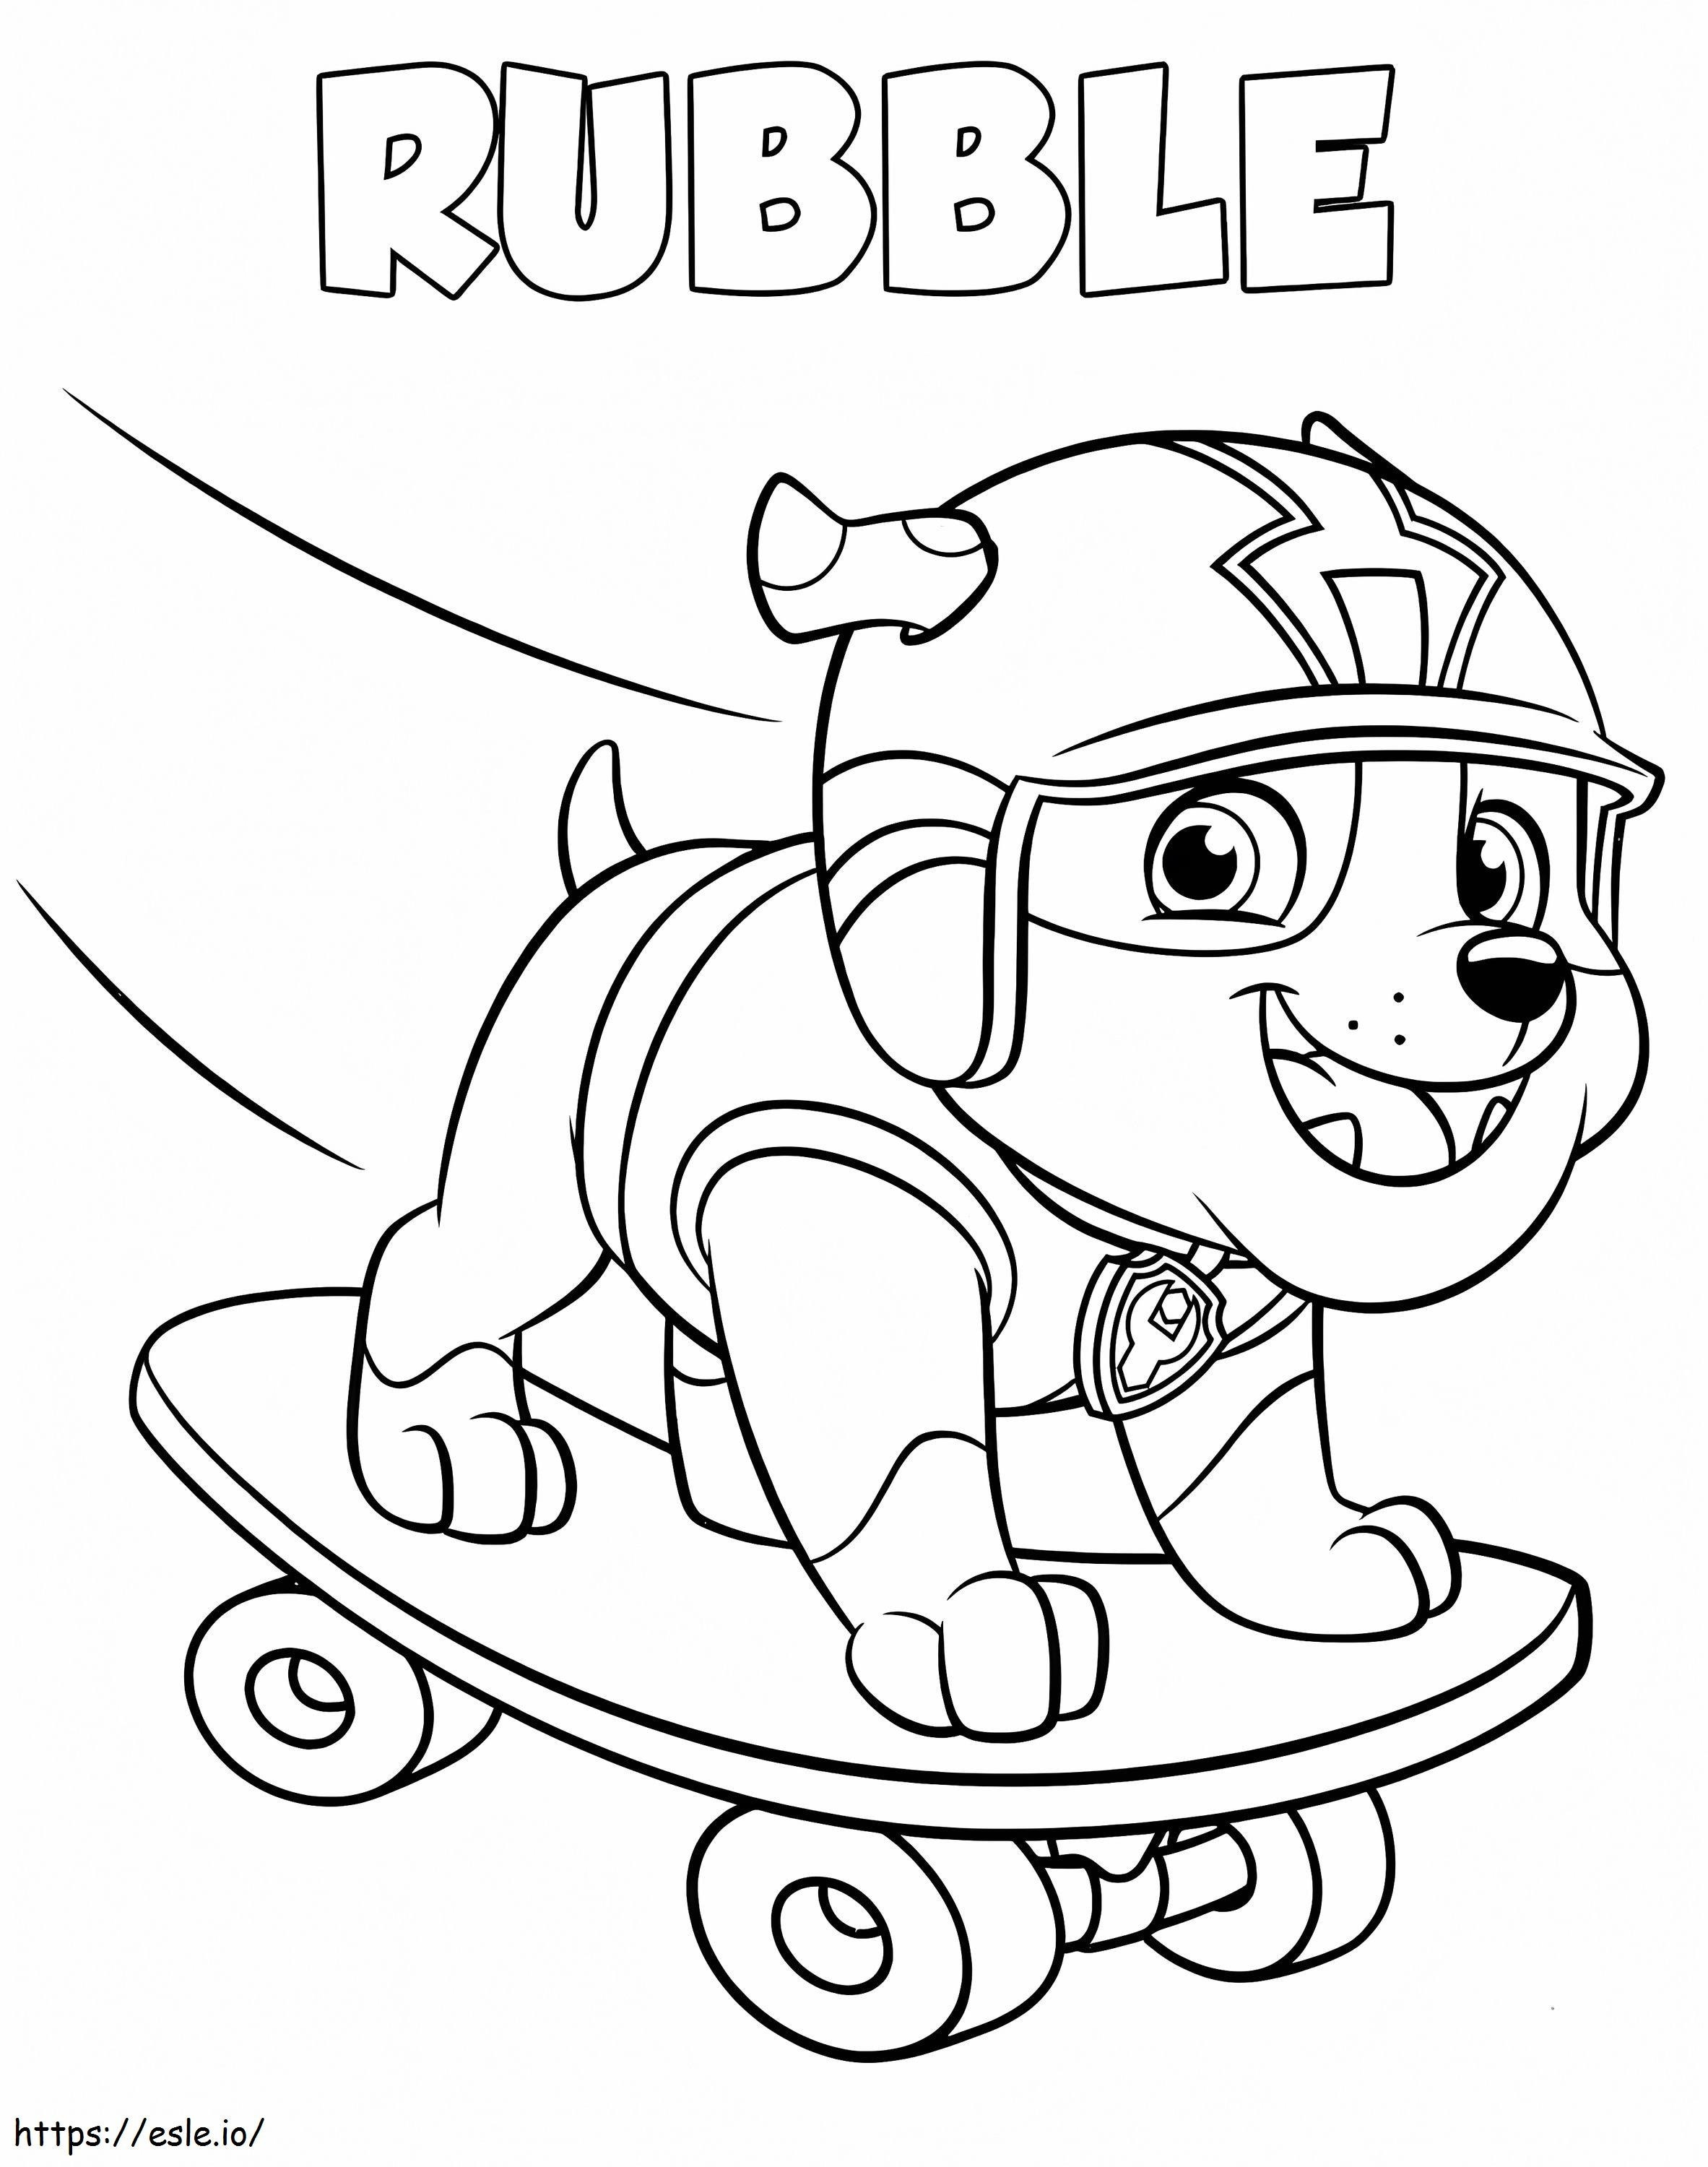 Skateboarding rubble coloring page